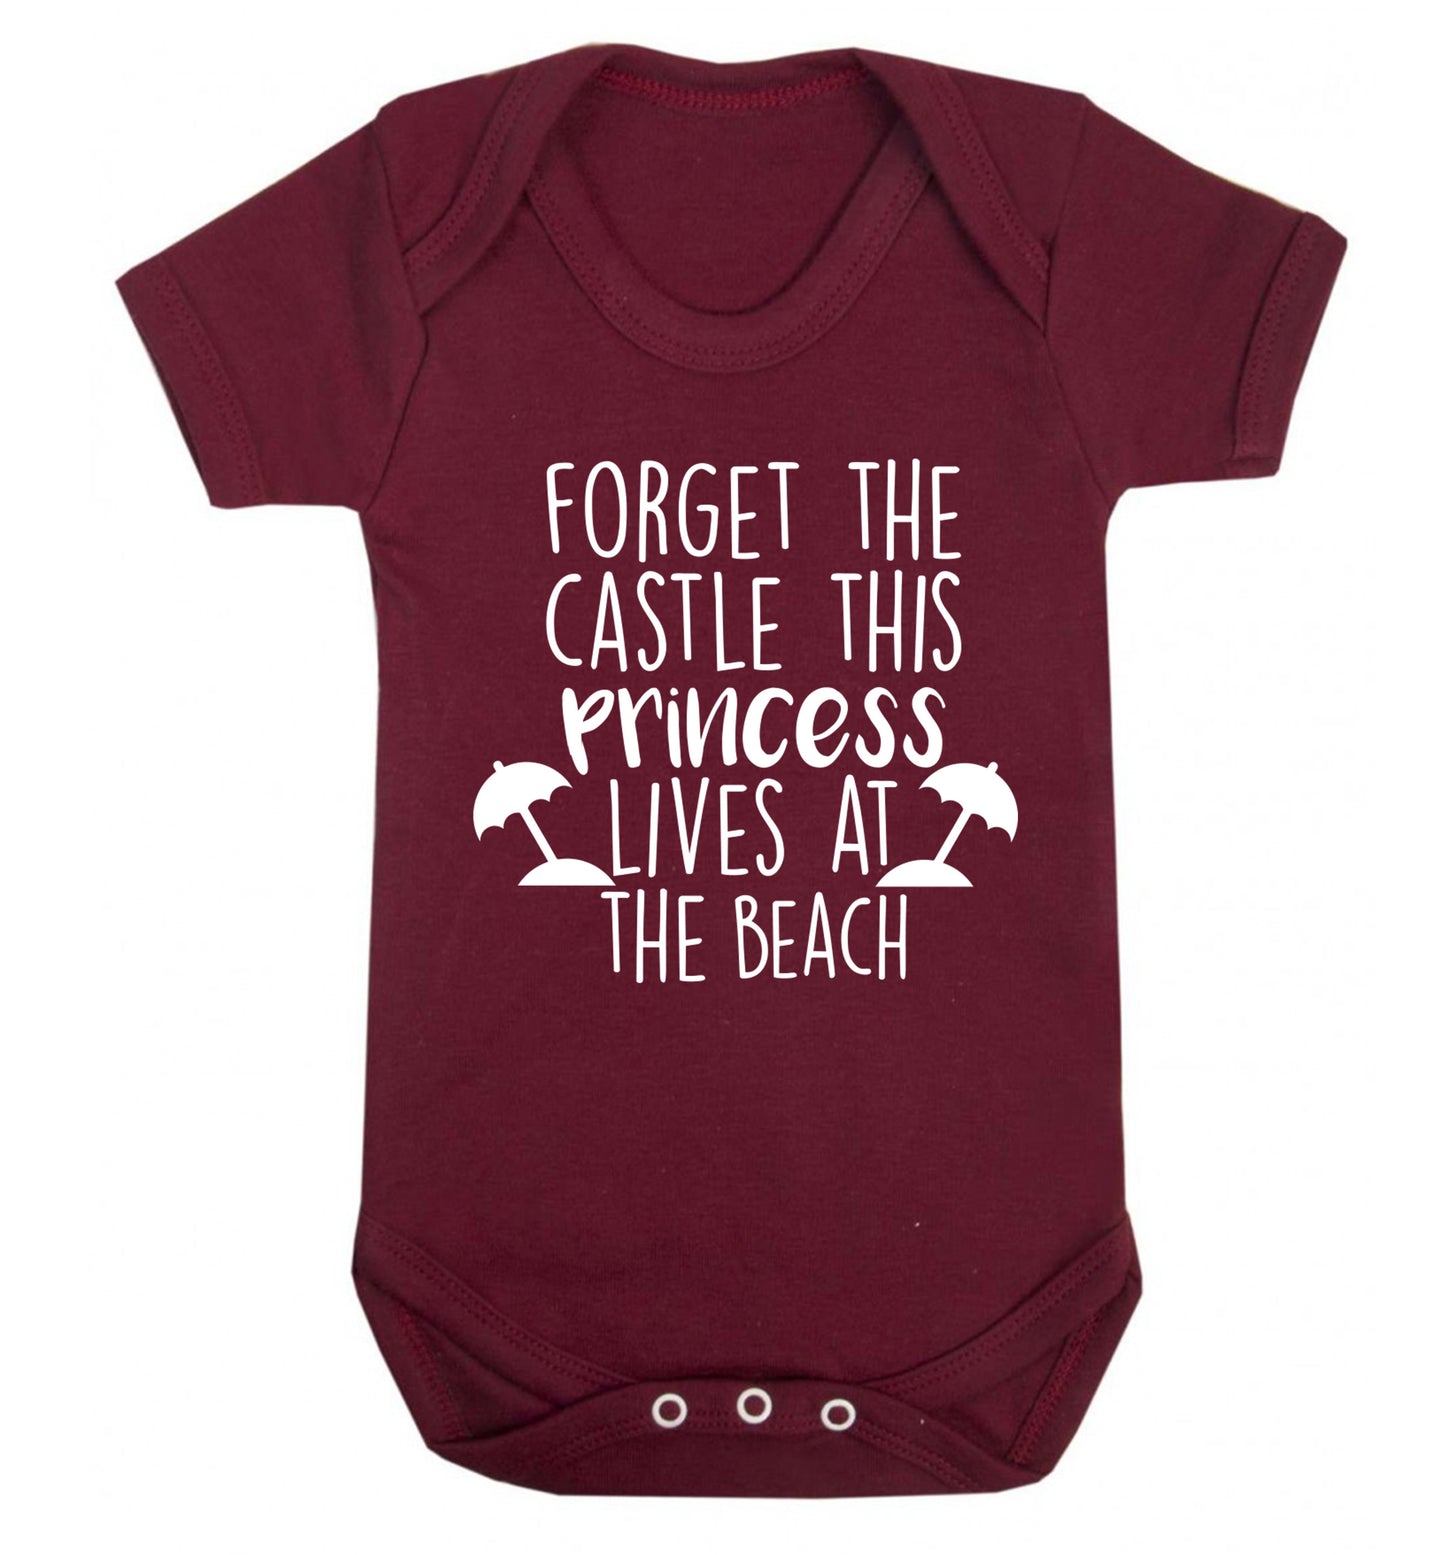 Forget the castle this princess lives at the beach Baby Vest maroon 18-24 months